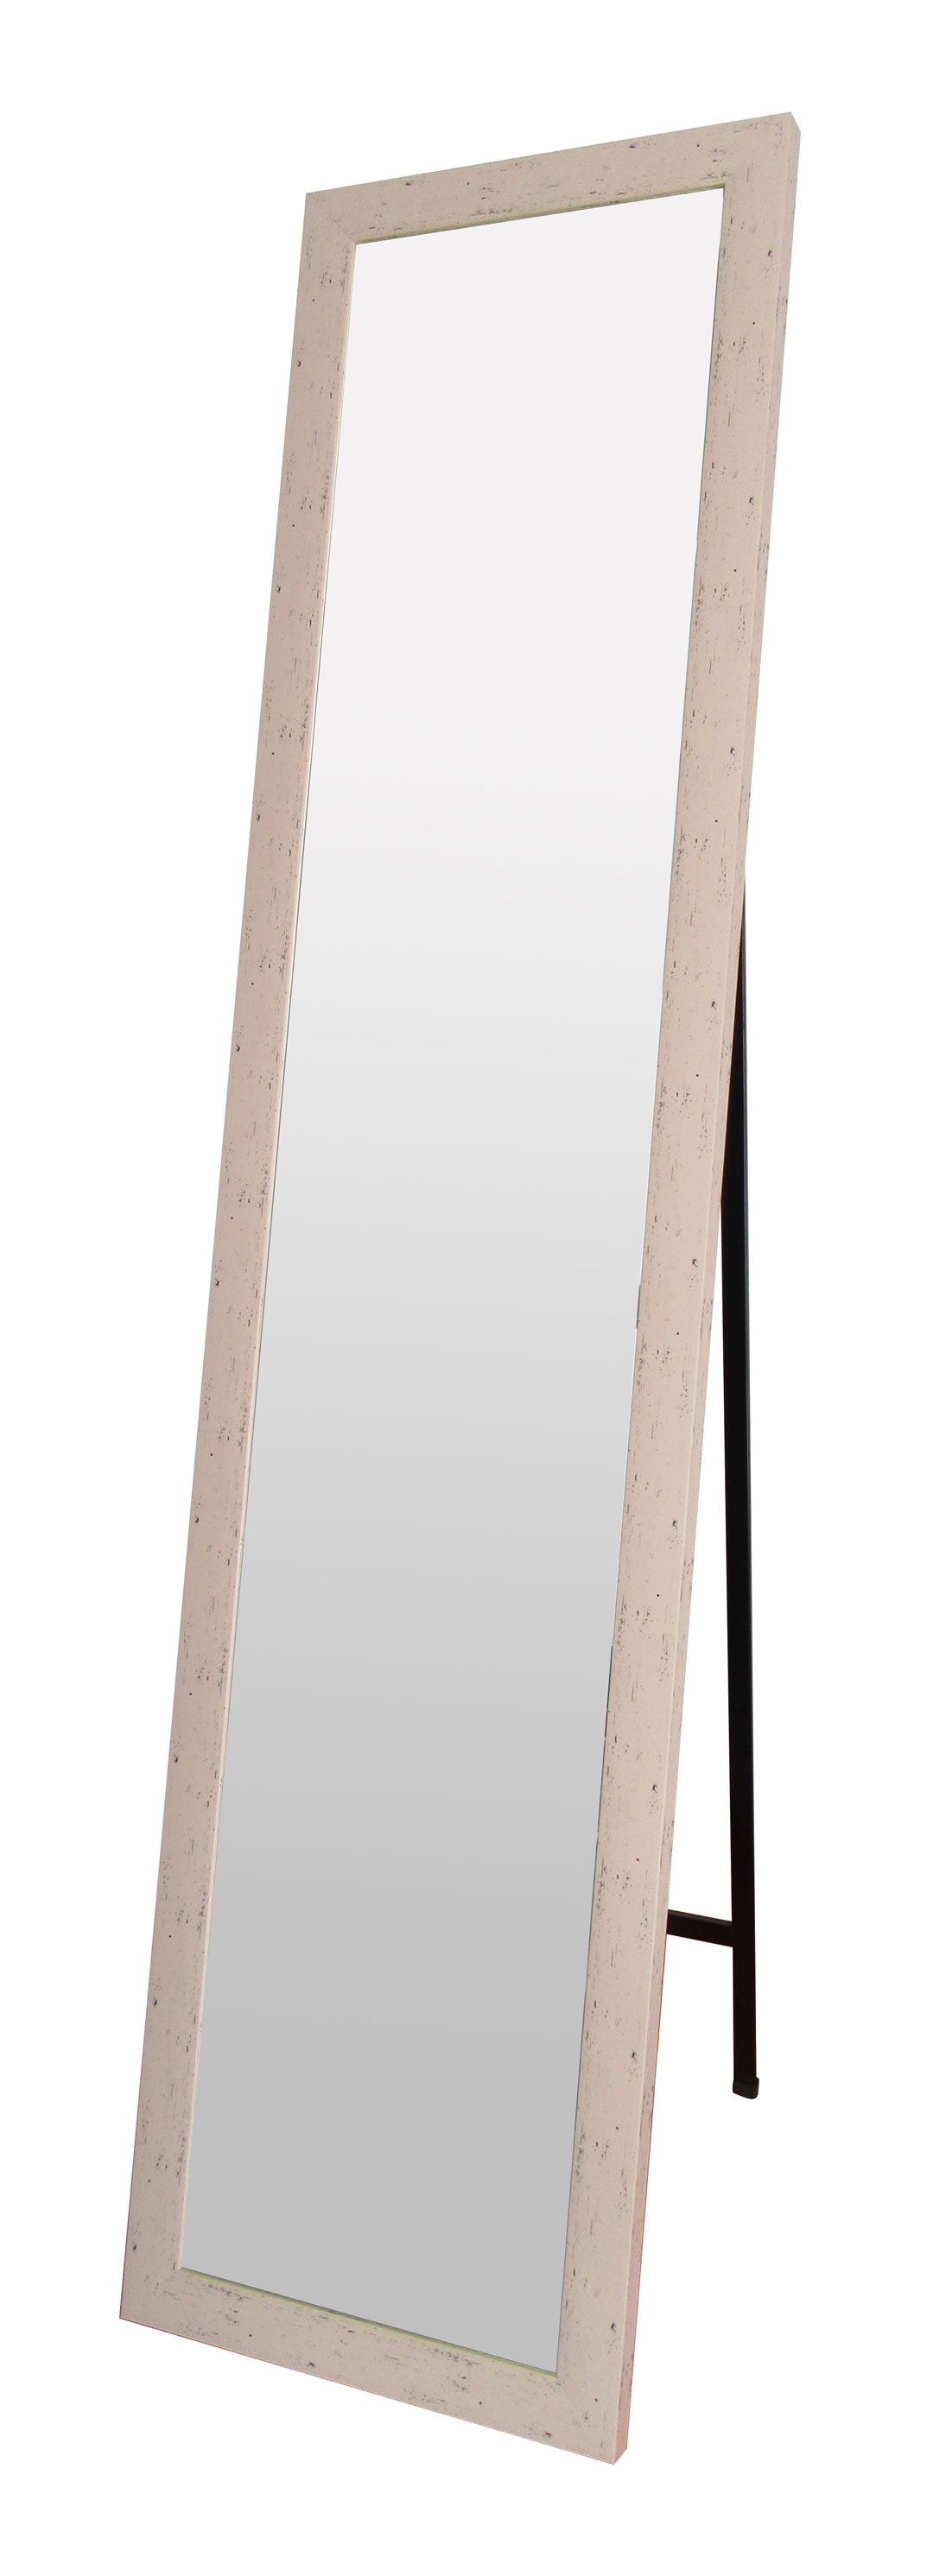 SUPERLIVING FULL BODY MIRROR WITH STAND 30 X 150CM 3 COLORS